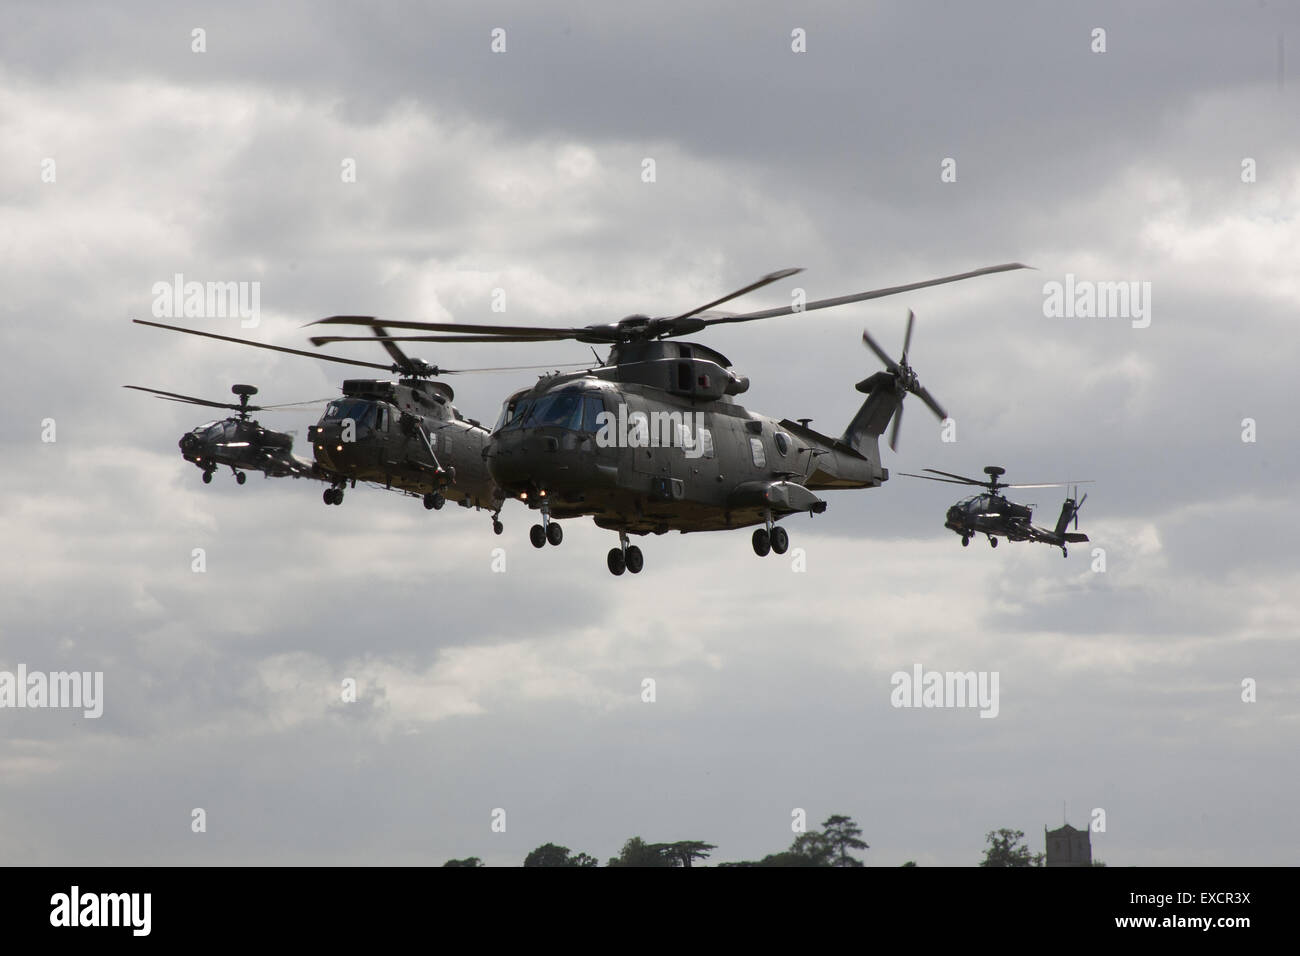 Yeovilton, Somerset, UK. 11th July, 2015. One of the Fleet Air Arms new Merlin H C mk 3 leads a Sea King H C mk 4 during flying at Yeovilton International Air Day, flanked by a pair of Apache Attack Helicopters flown by the Army AIr Corps, The Merlin will have fully replaced the Sea King in the Commando Helicopter Force by March 2016 Credit:  David Billinge/Alamy Live News Stock Photo